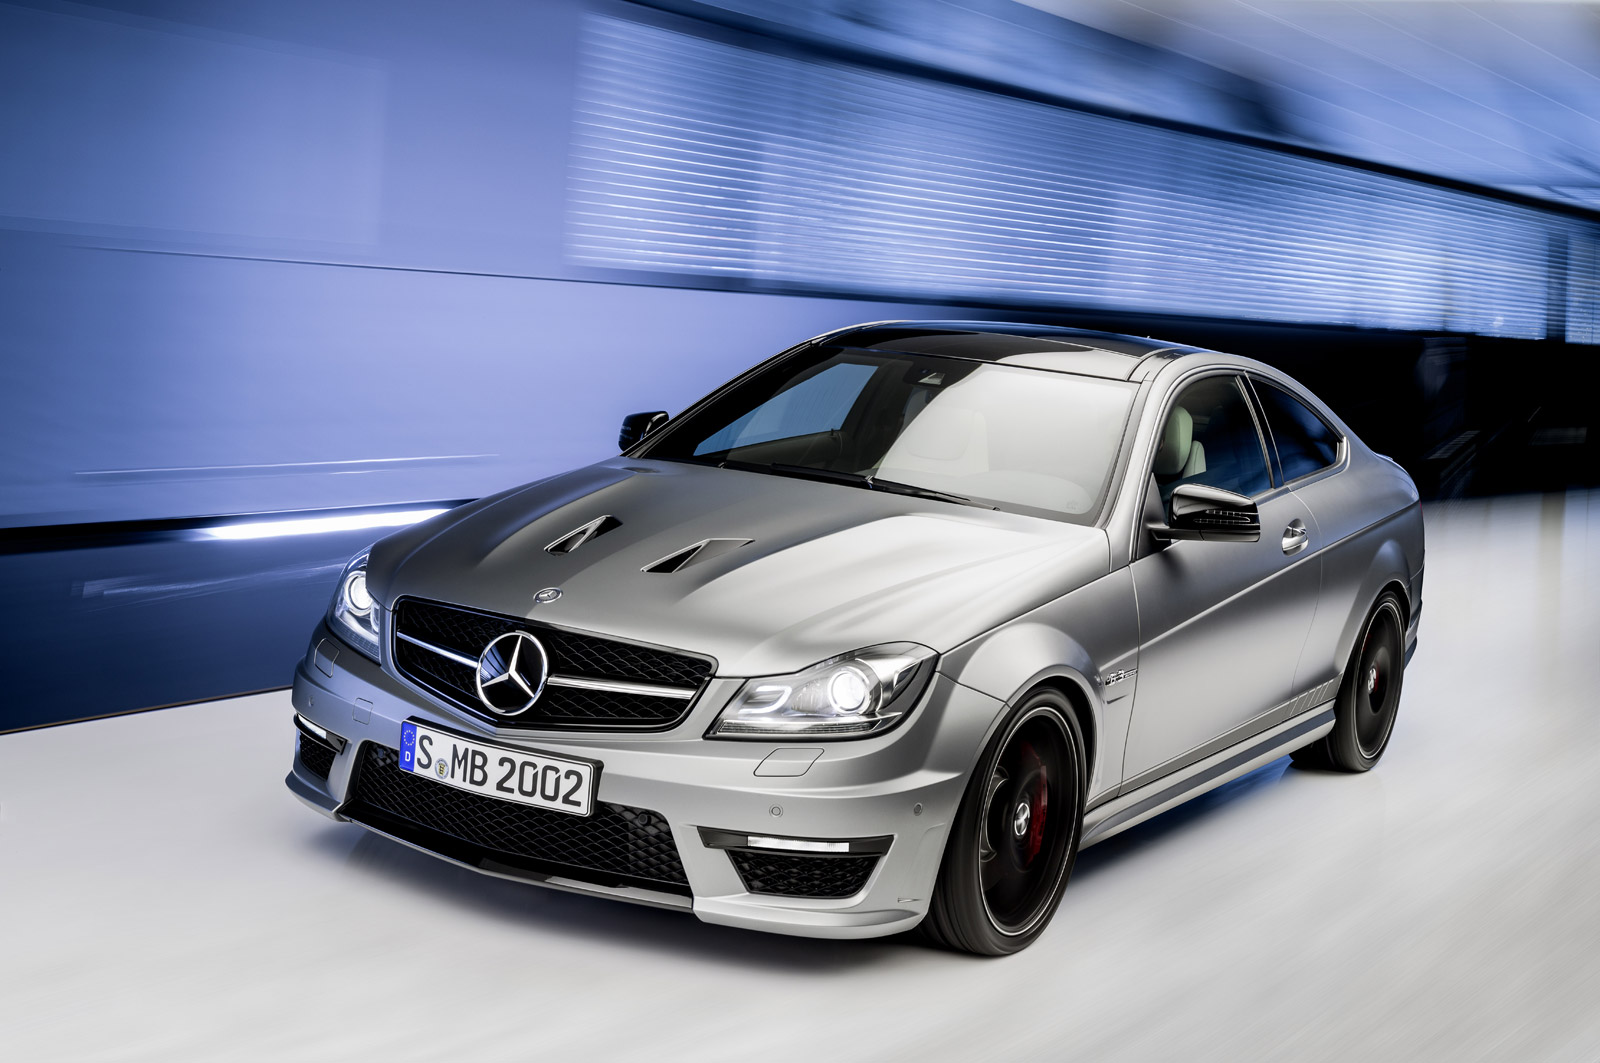 Mercedes Benz Launches More Powerful C63 Amg Edition 507